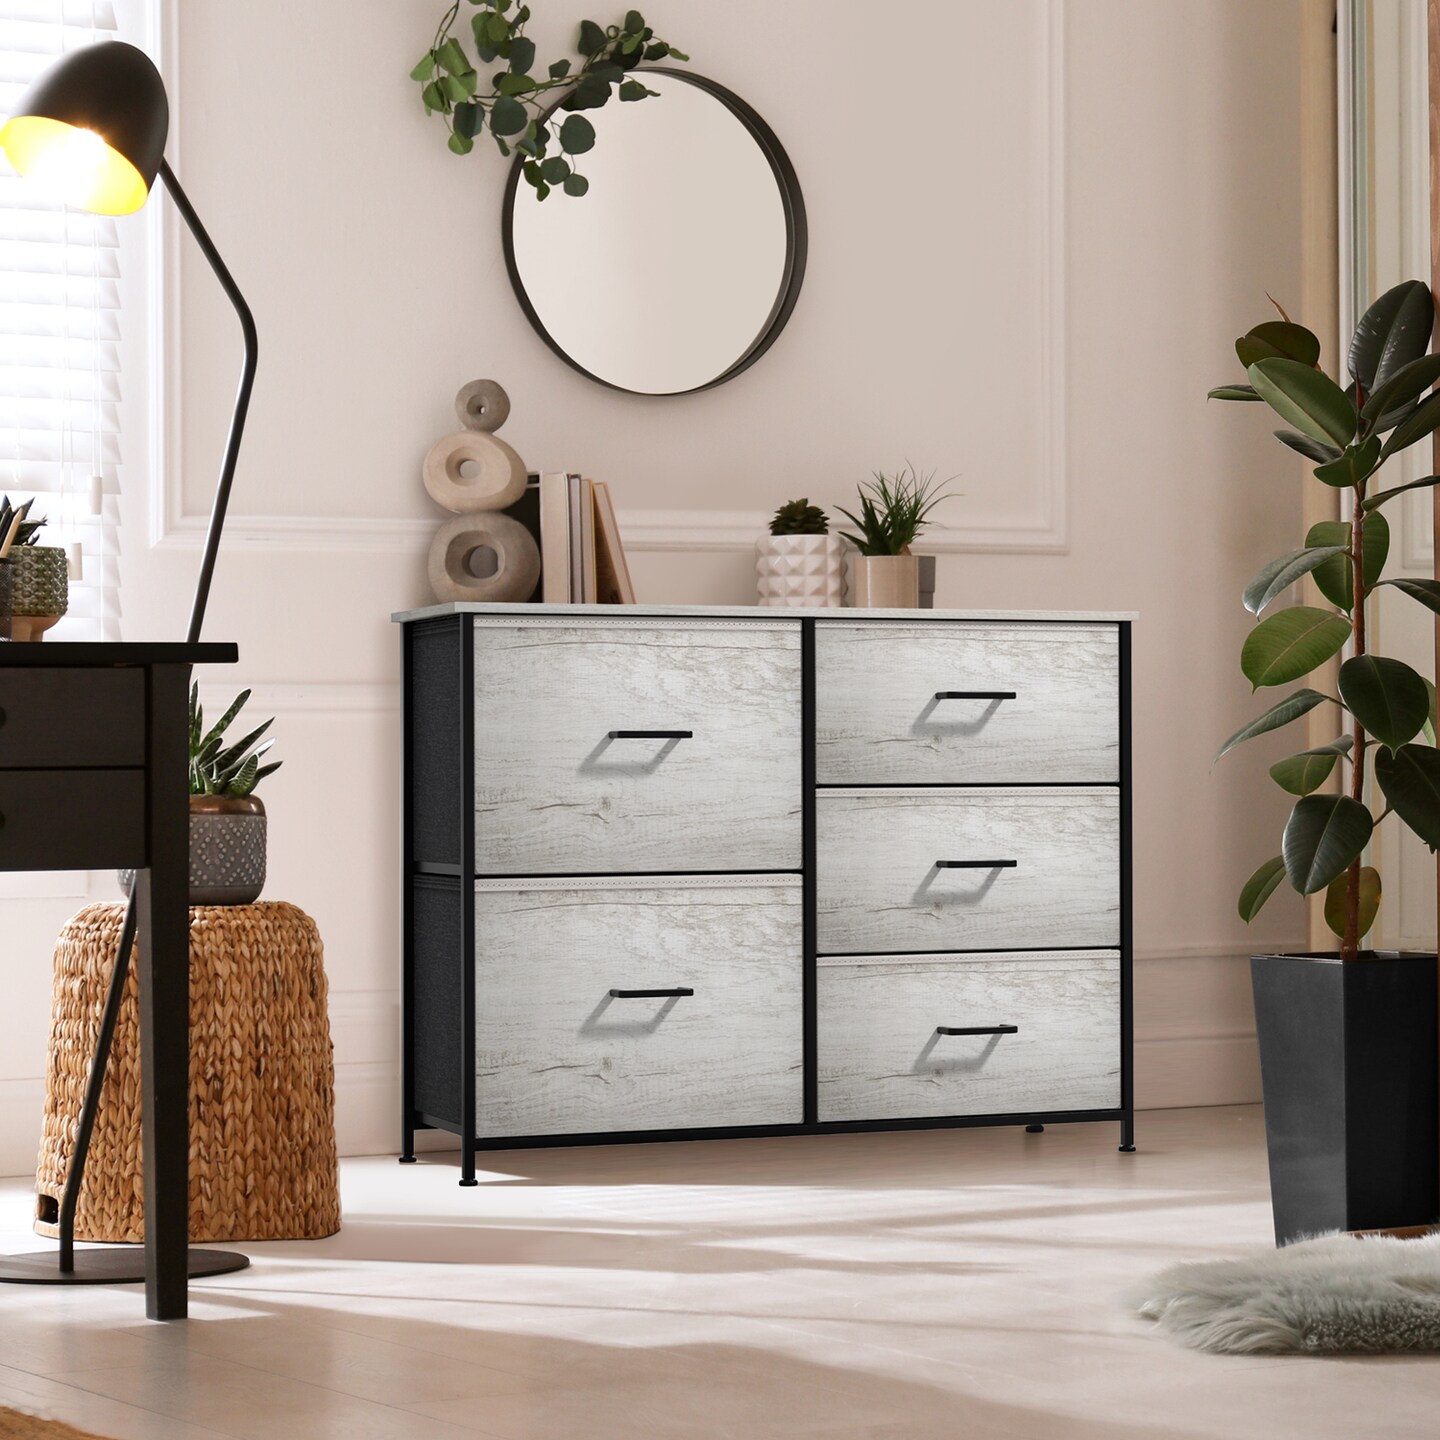 Sorbus Dresser with 5 Drawers - Storage Chest Organizer with Steel Frame, Wood Top, Handles, Fabric Bins